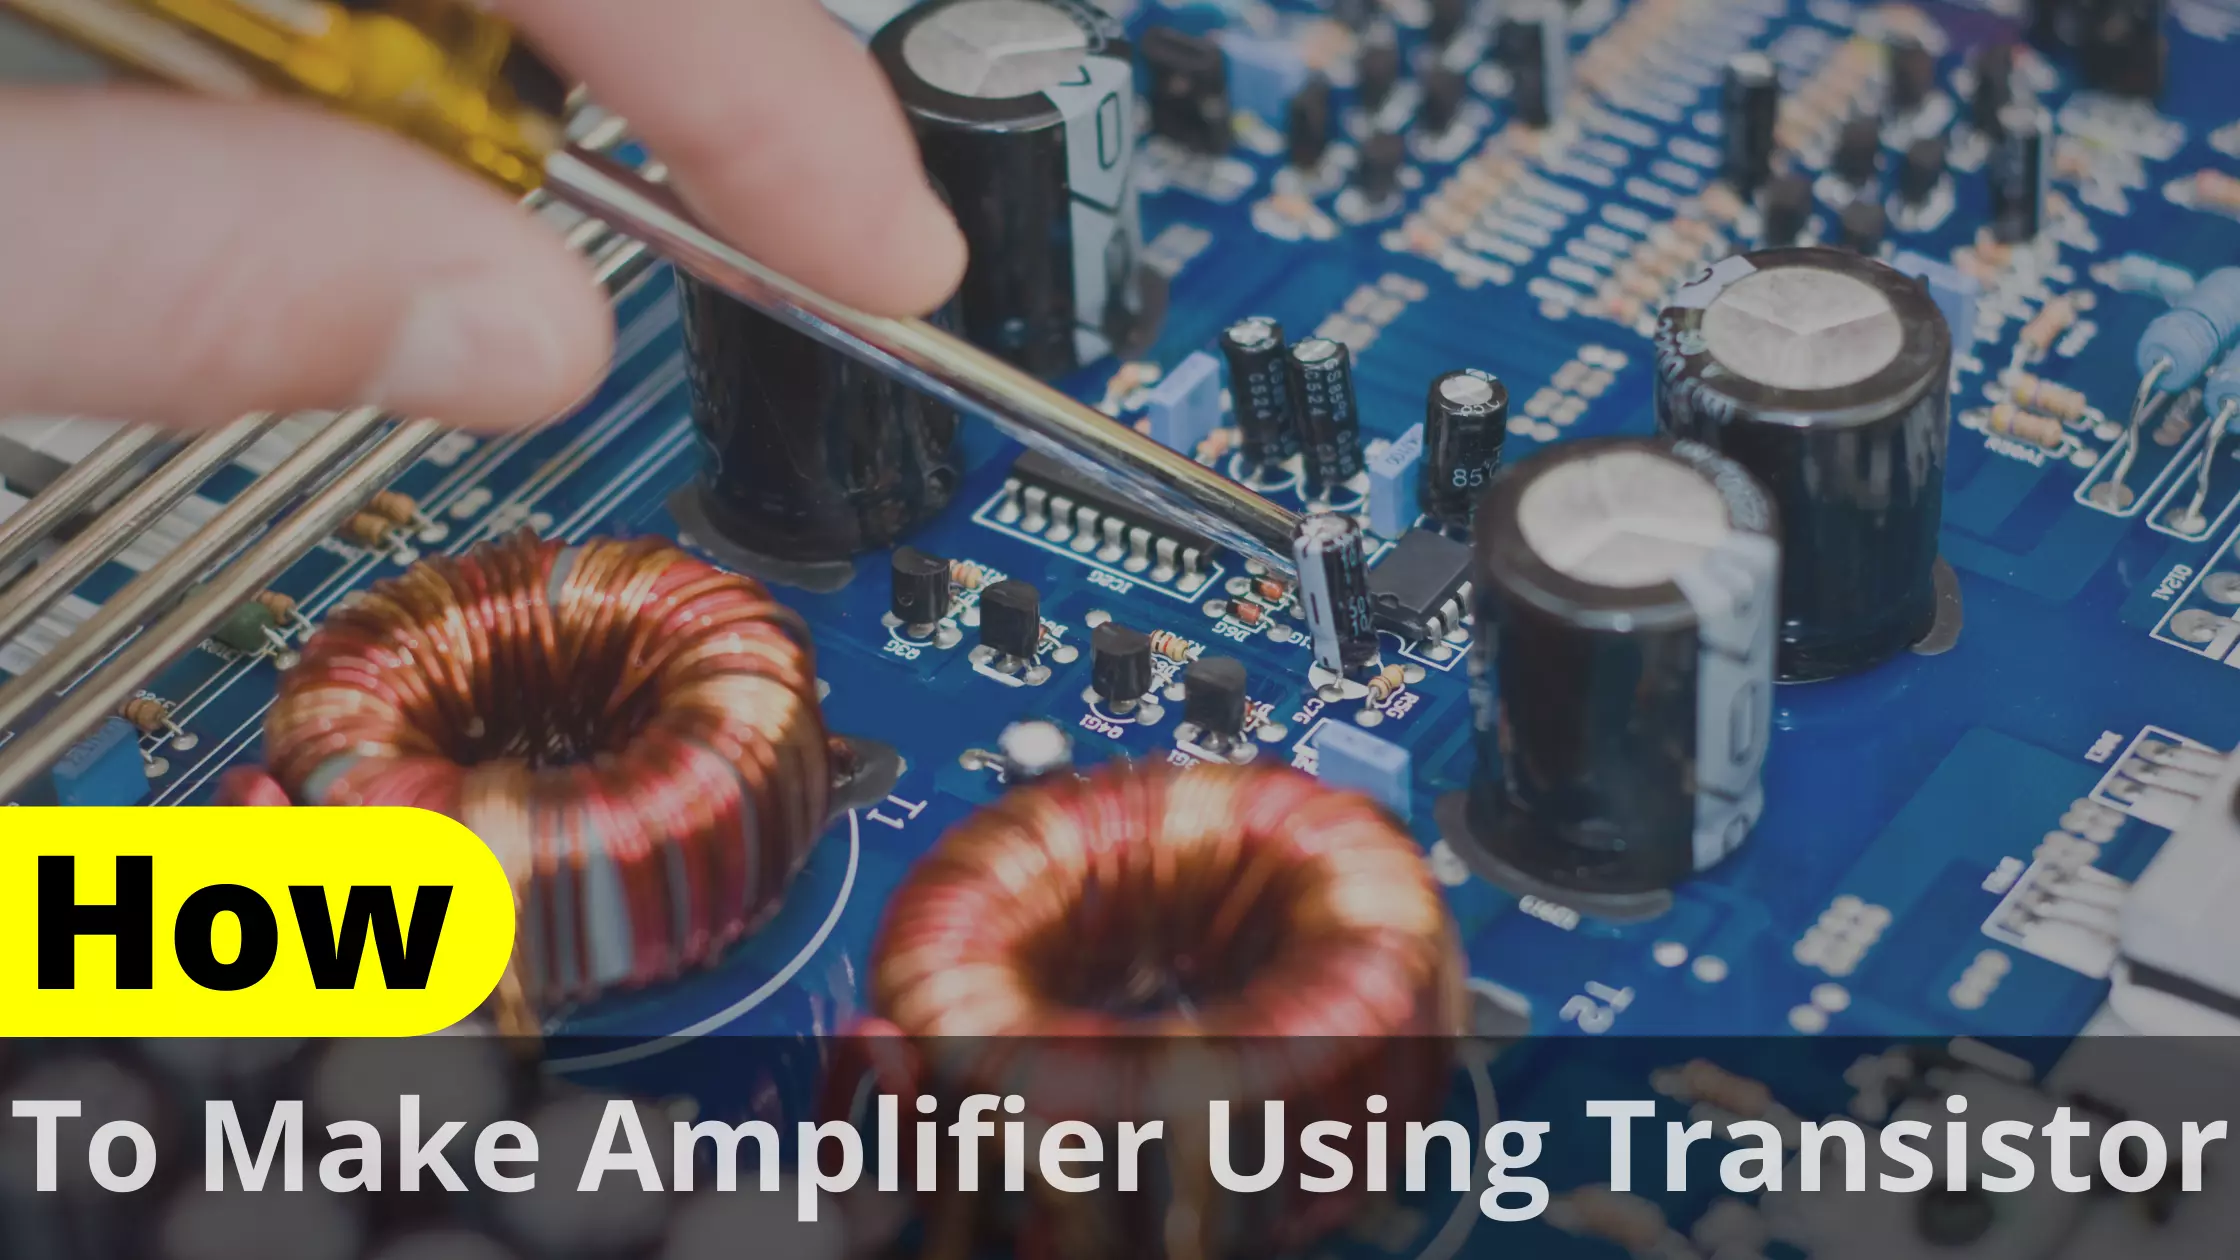 How To Make Amplifier Using Transistor? Guide 2022